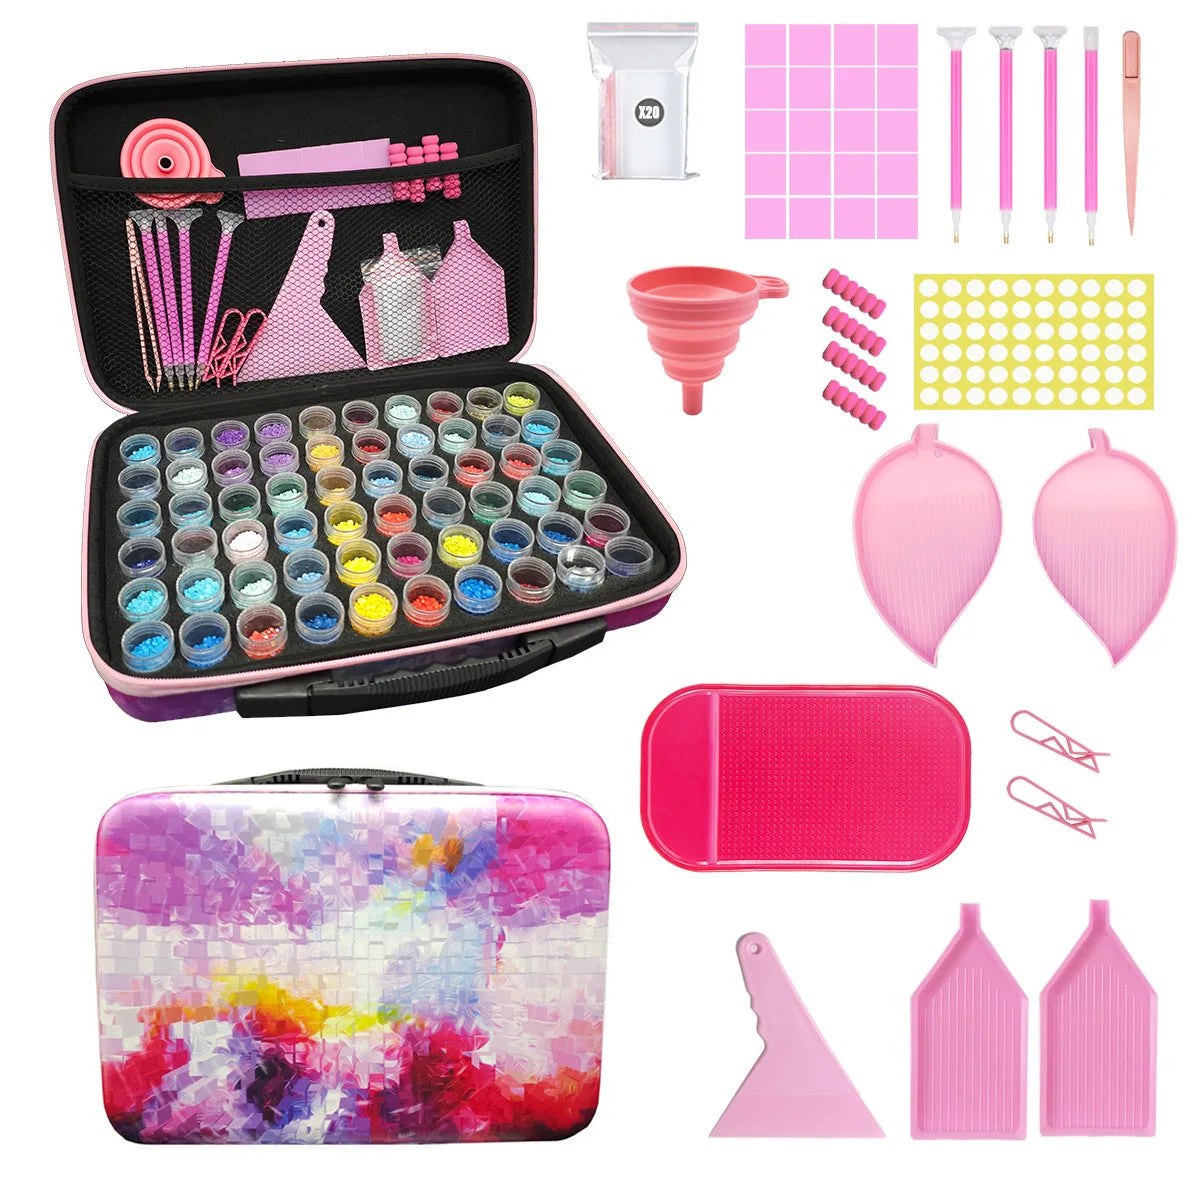 60Pcs Diamond Painting Tool Kit with Pink Carry Case